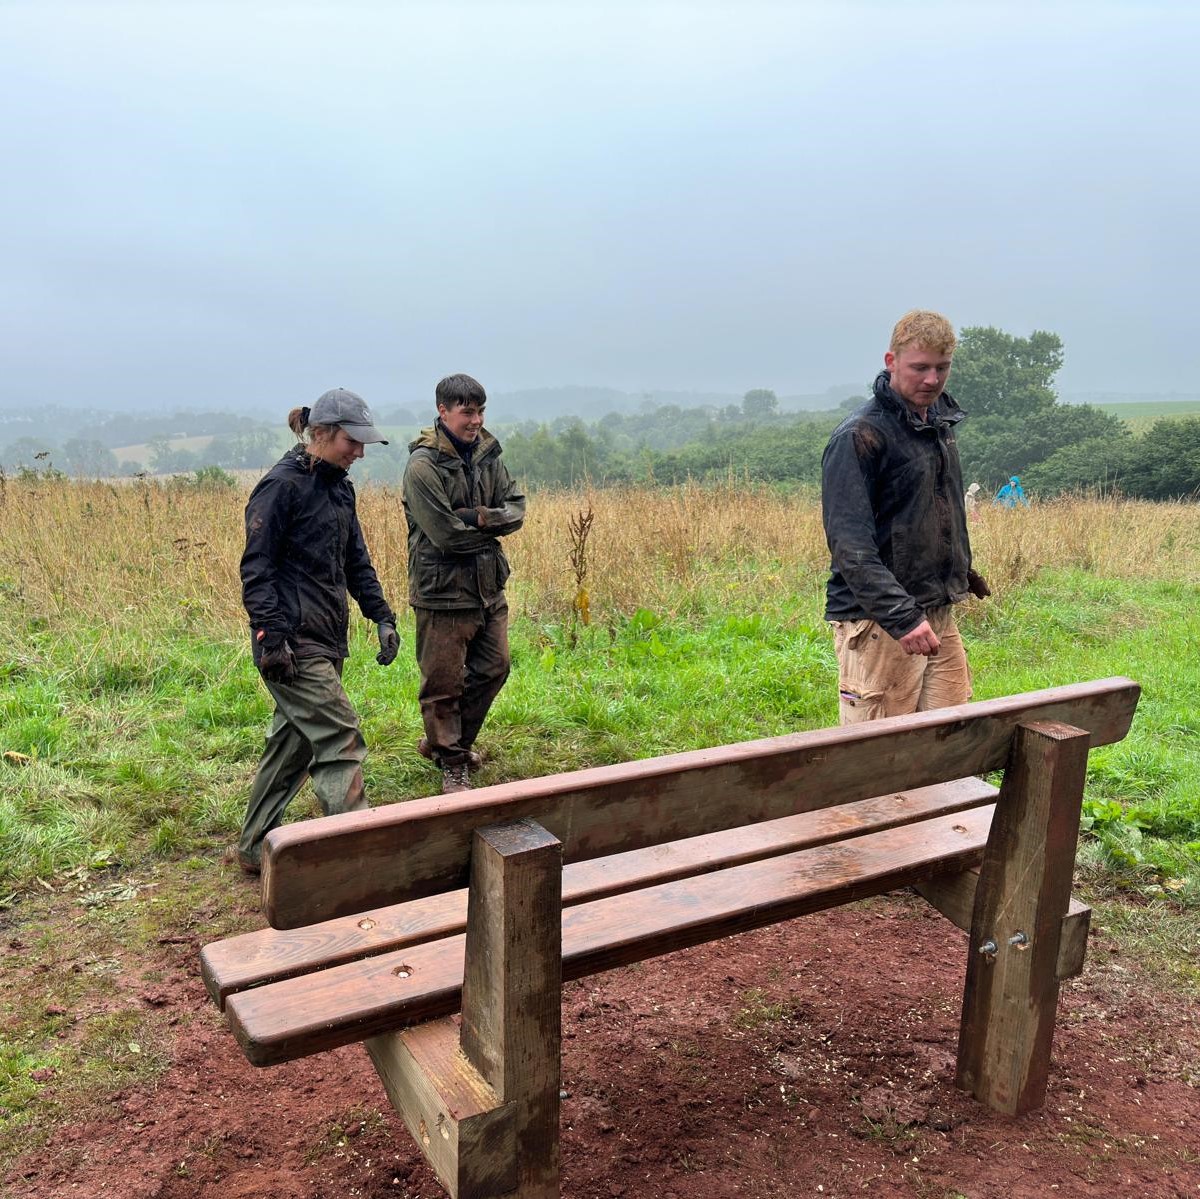 A new bench has been installed at Conqueror Wood by the ranger team. A perfect place for a quiet moment whilst taking in the view. #bench #conquerorwood #countrysiderangers